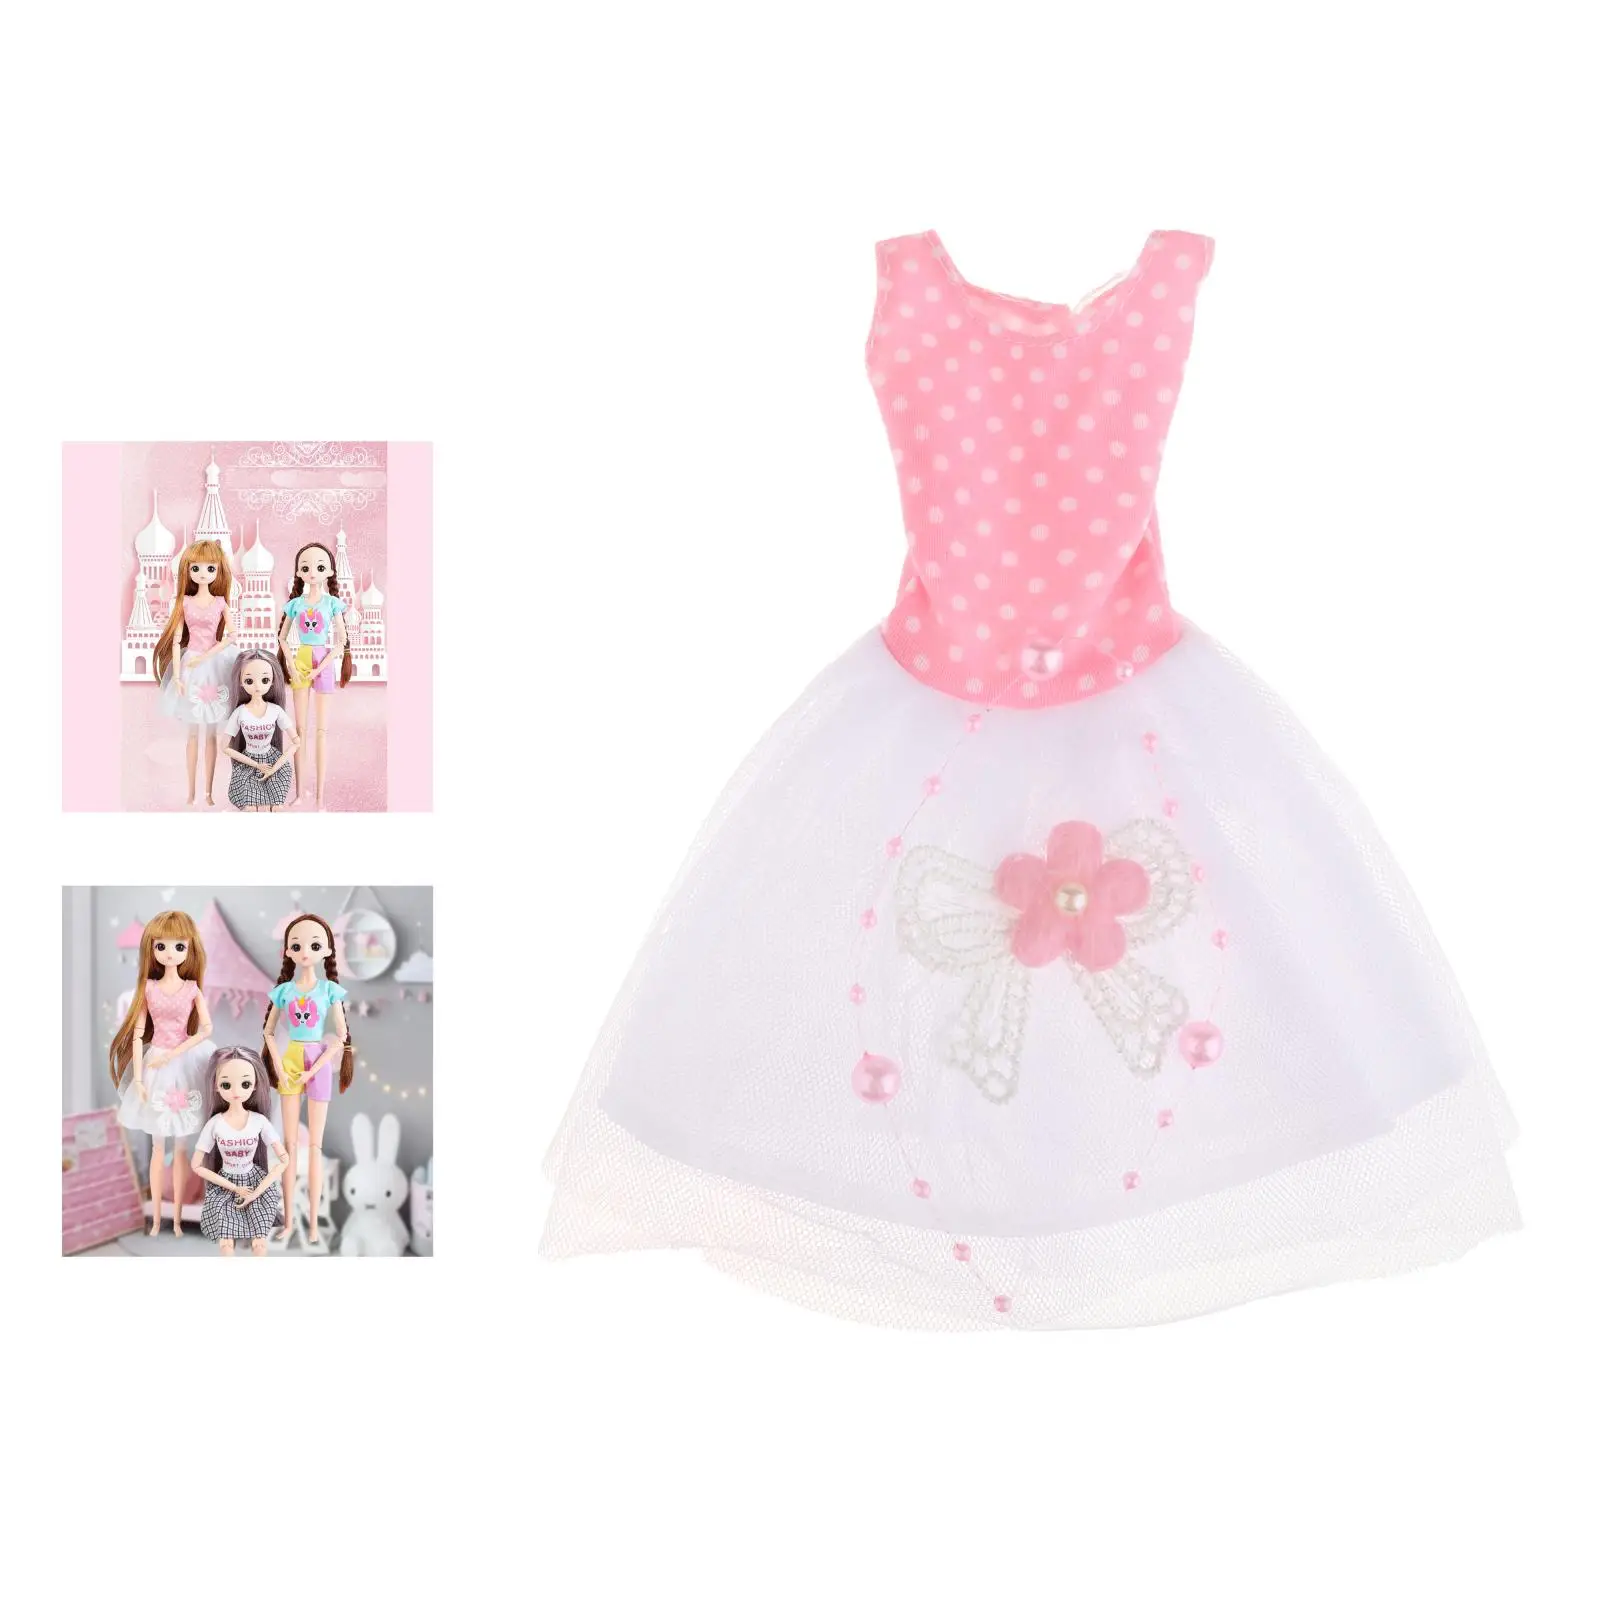 Lovely 12 Inch Mini Girl Doll Clothes Set Dolls Casual Outfits DIY Clothing